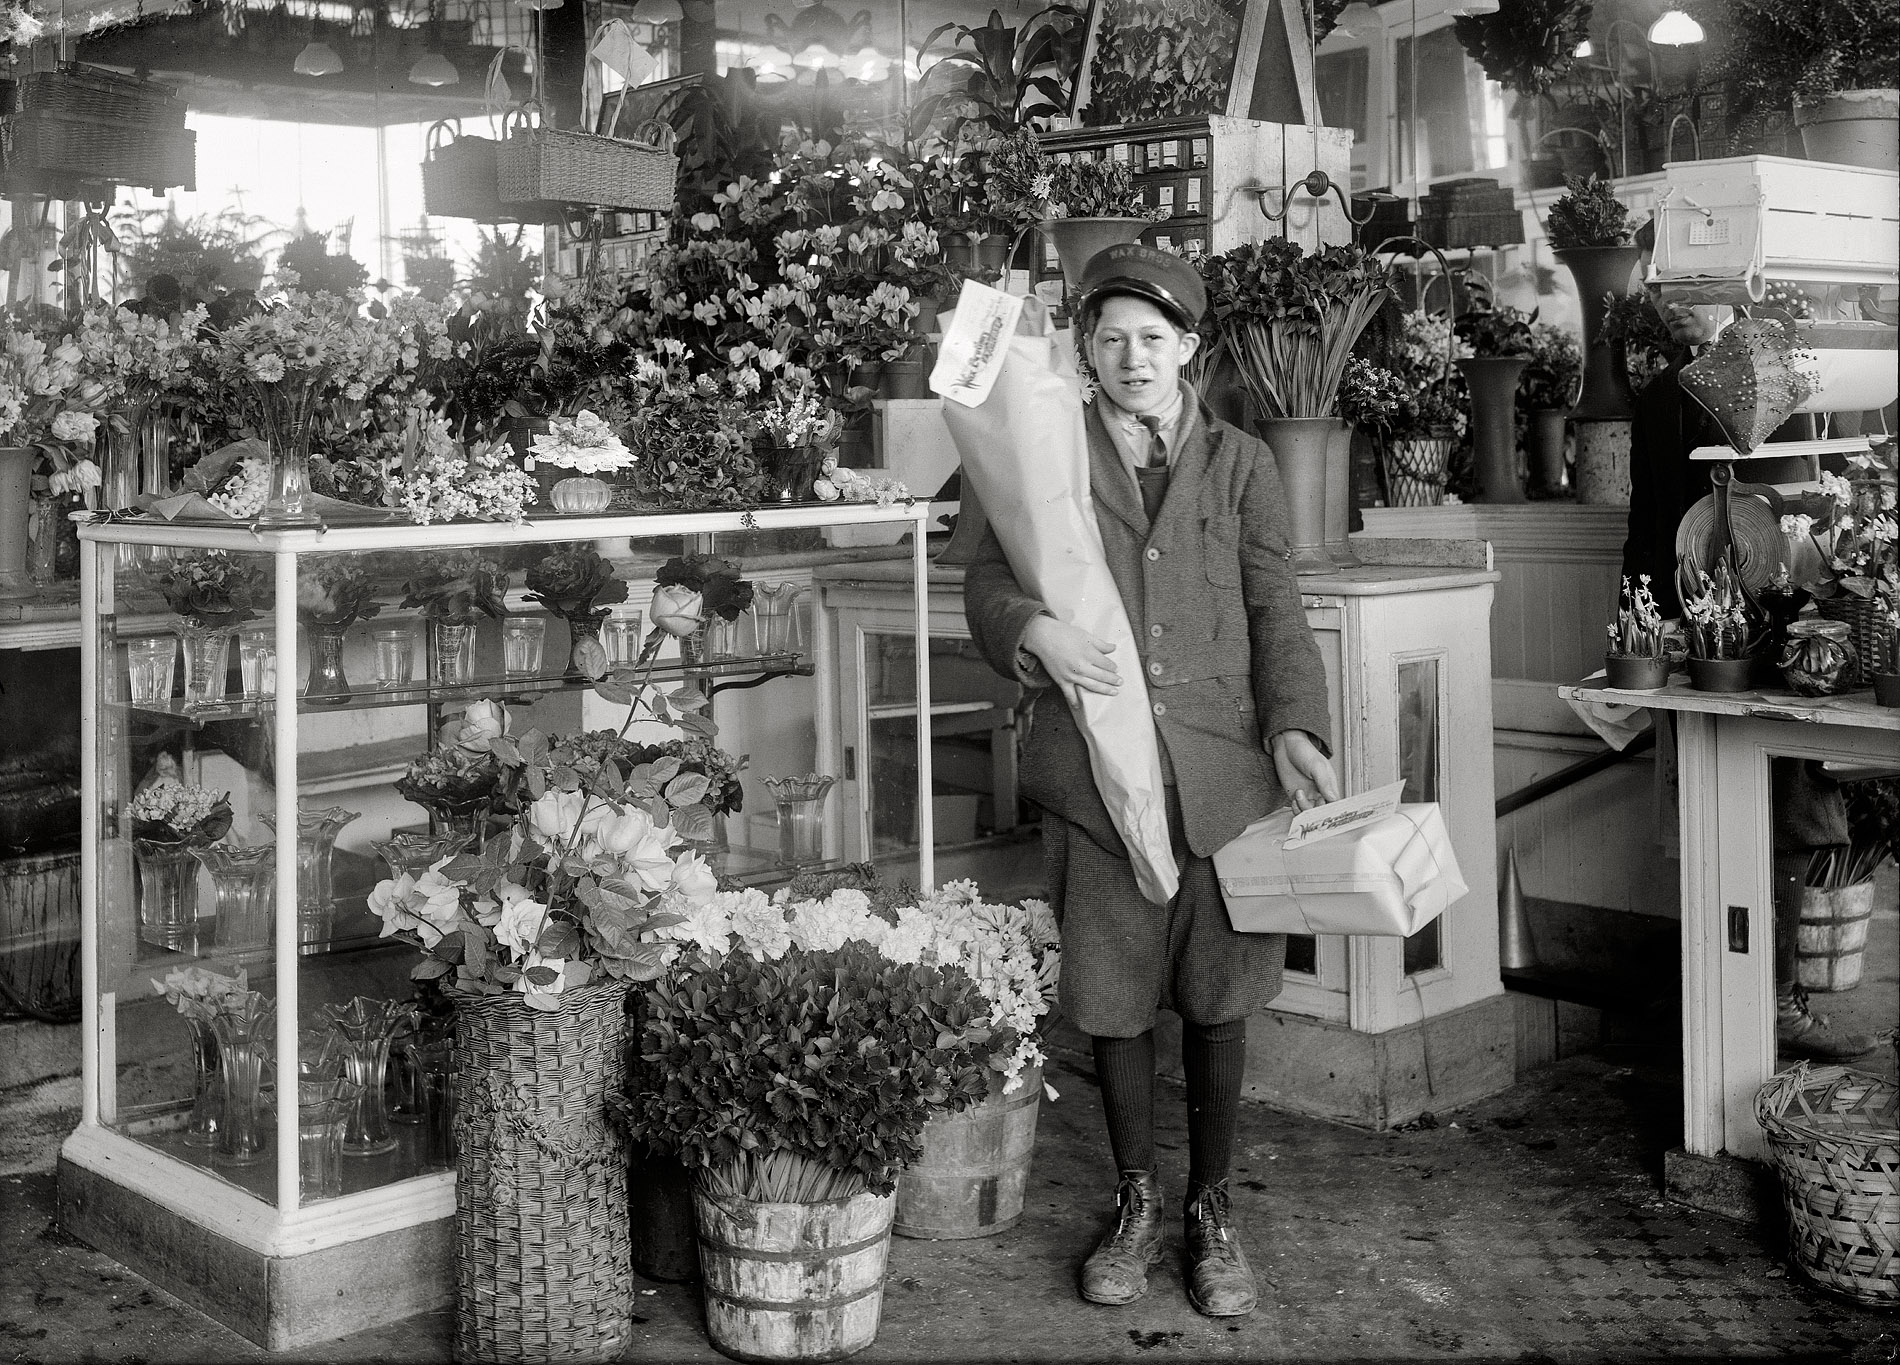 February 2, 1917. Boston, Massachusetts. "Abe Singer, 14-year old helper at Wax Florists, 143 Tremont Street. He delivers bundles, tends the door, etc." Photograph and caption by Lewis Wickes Hine. View full size.